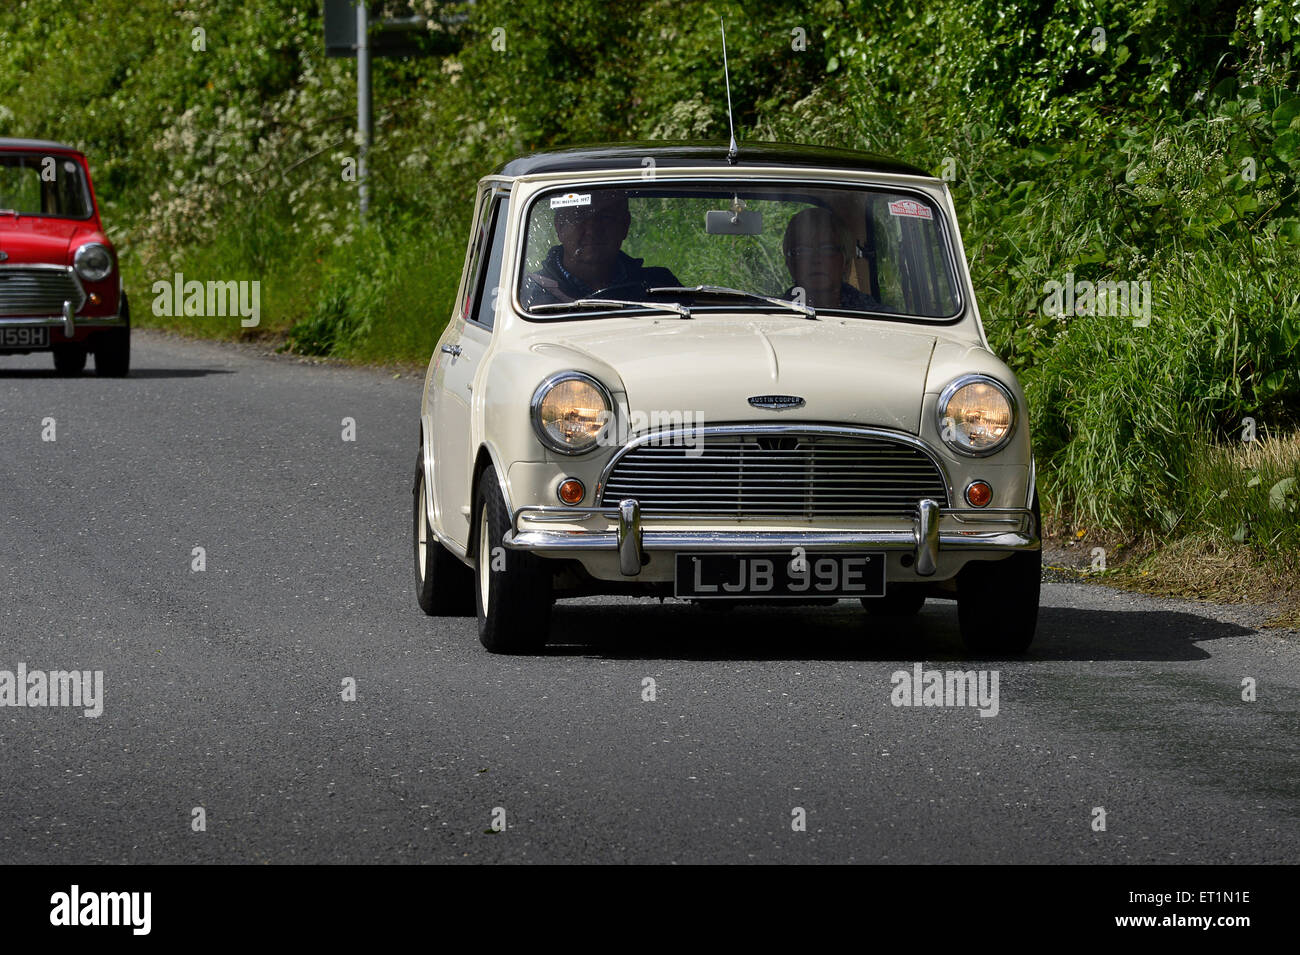 1960s Austin Mini Cooper classic car on country road, Burnfoot, County Donegal, Ireland. Stock Photo